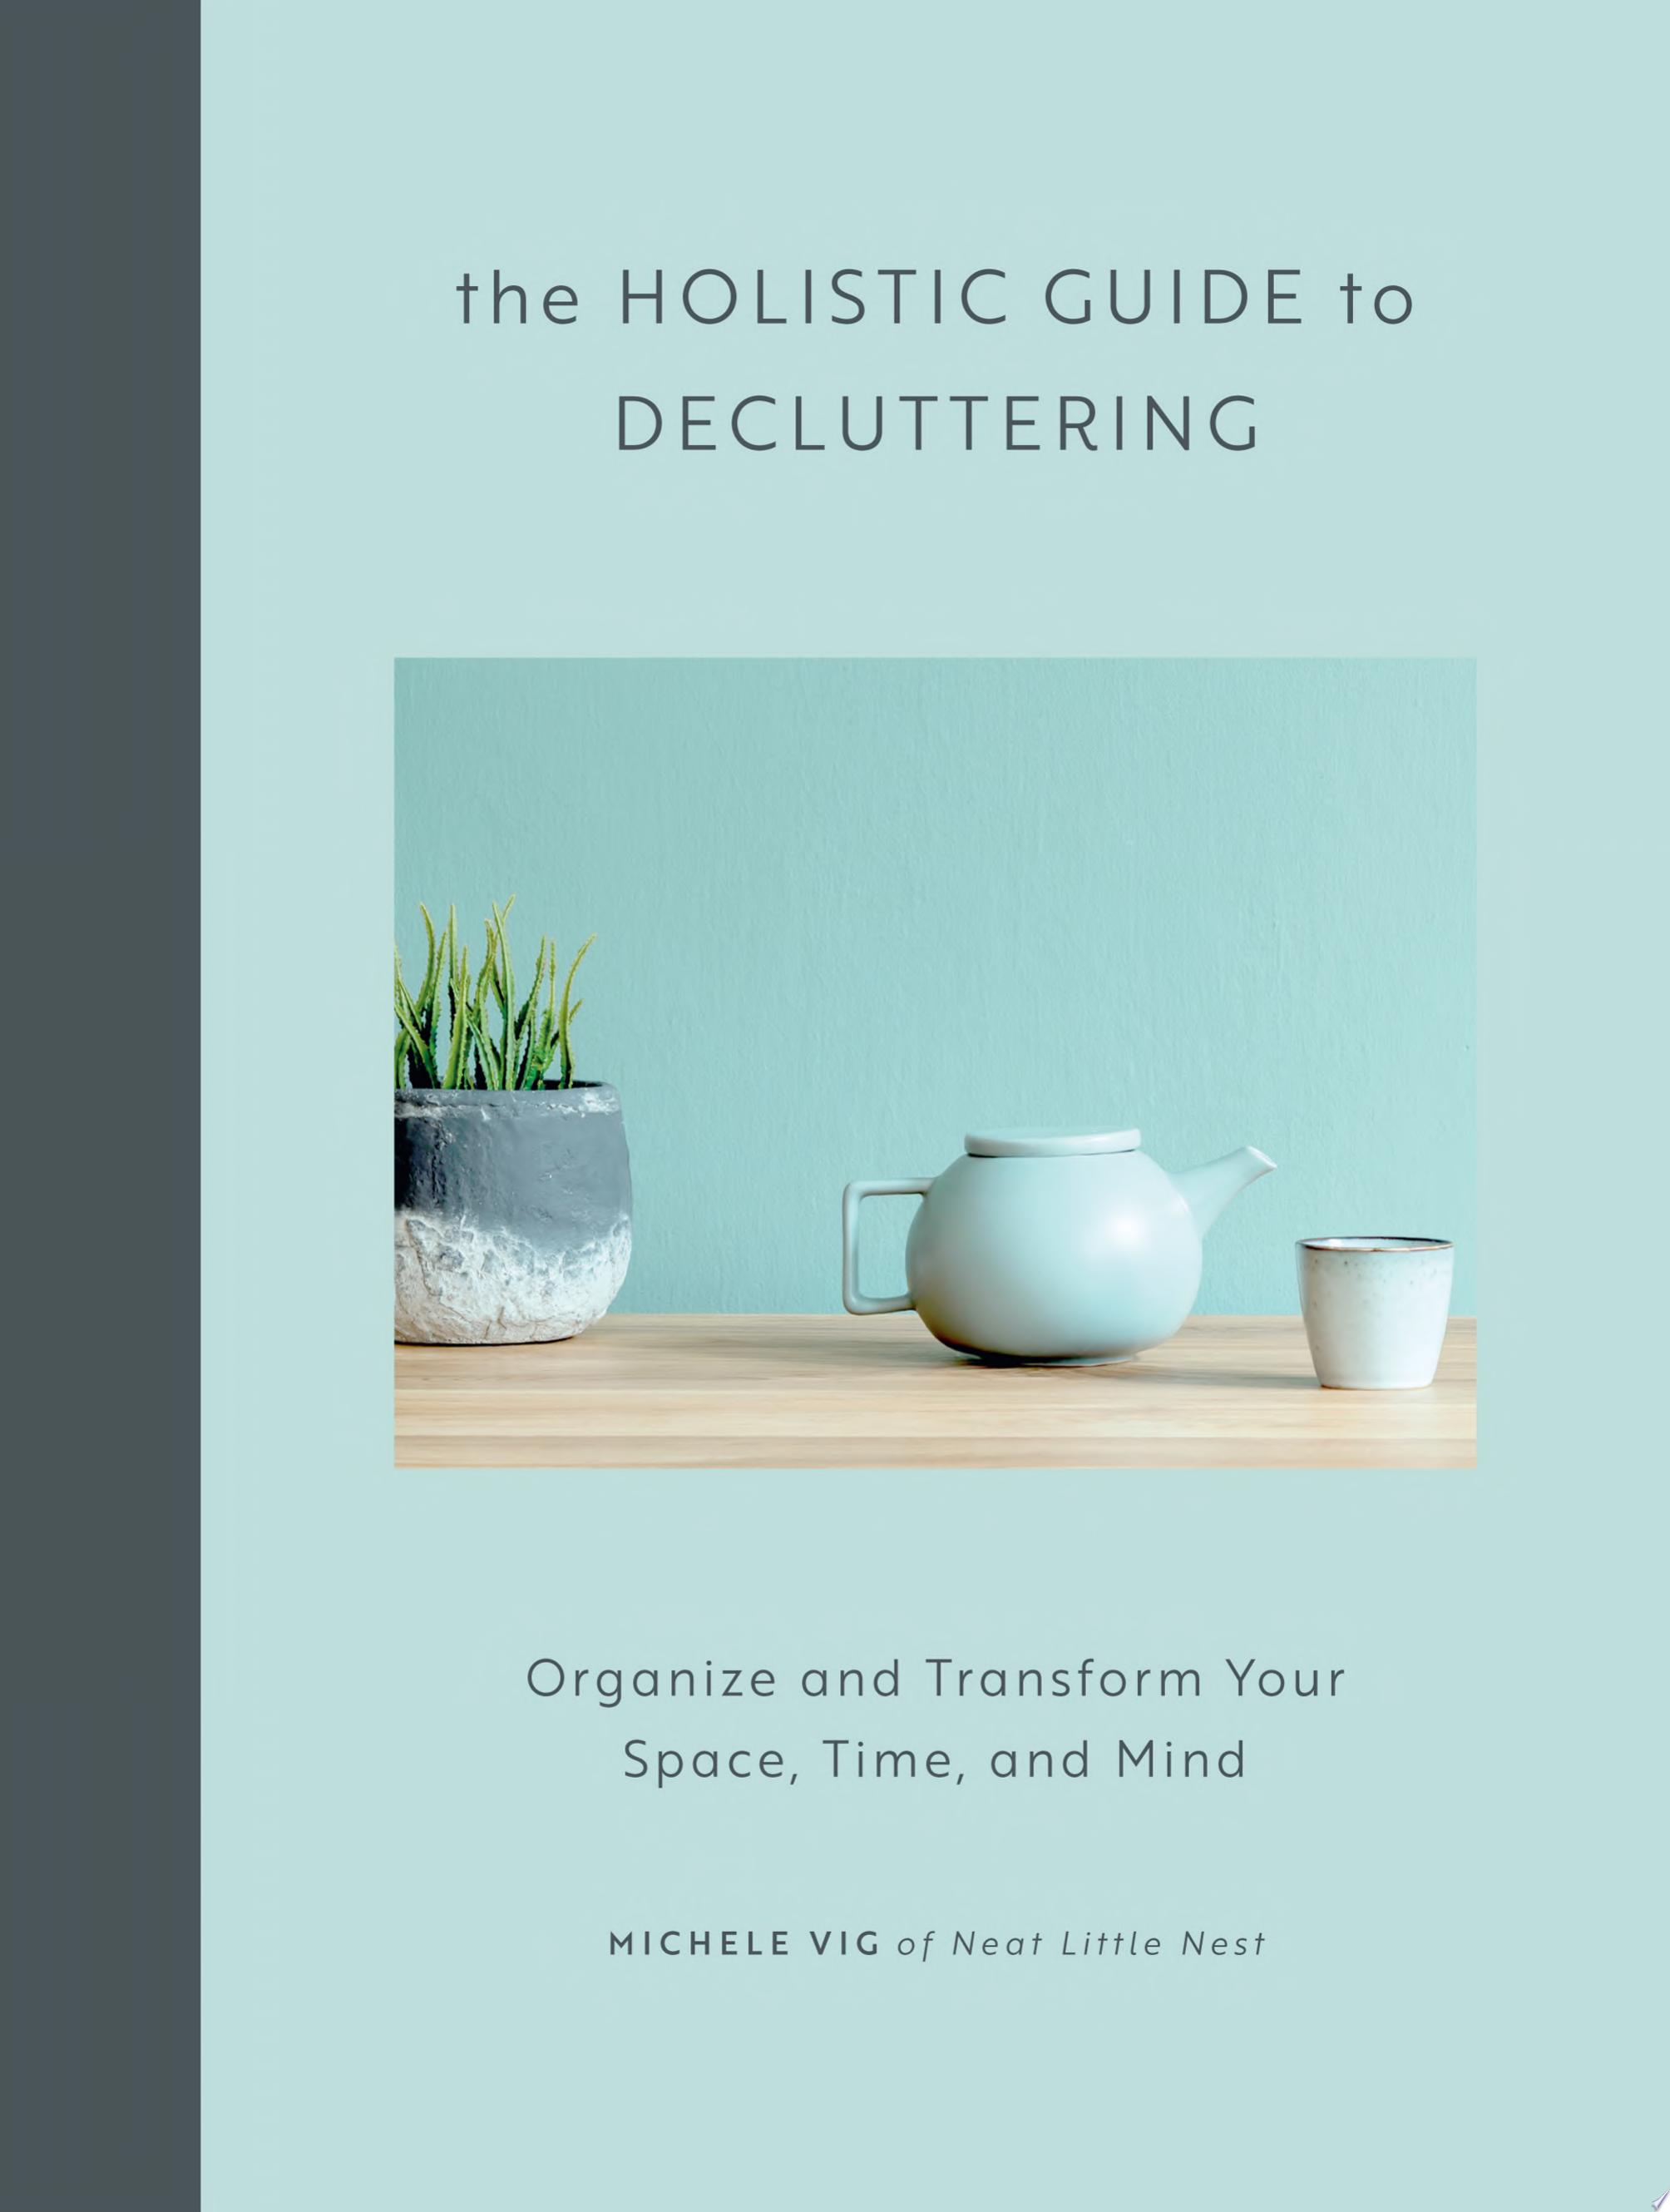 Image for "The Holistic Guide to Decluttering"